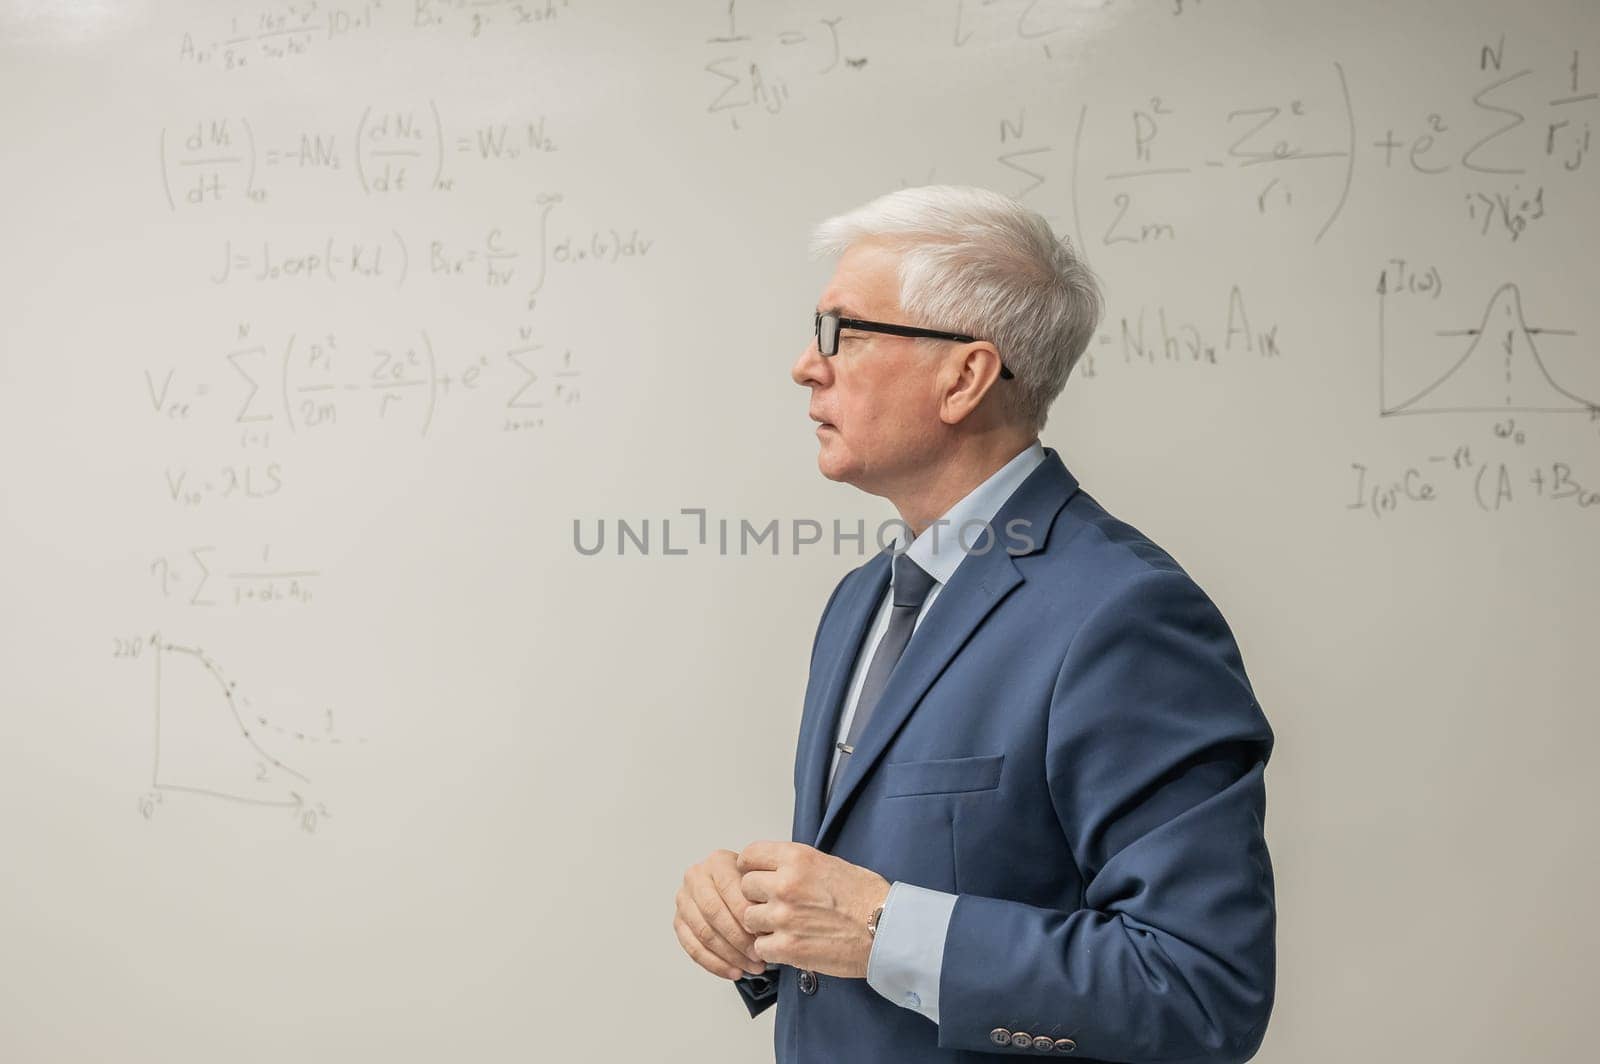 Mature man stands at a white board with written formulas